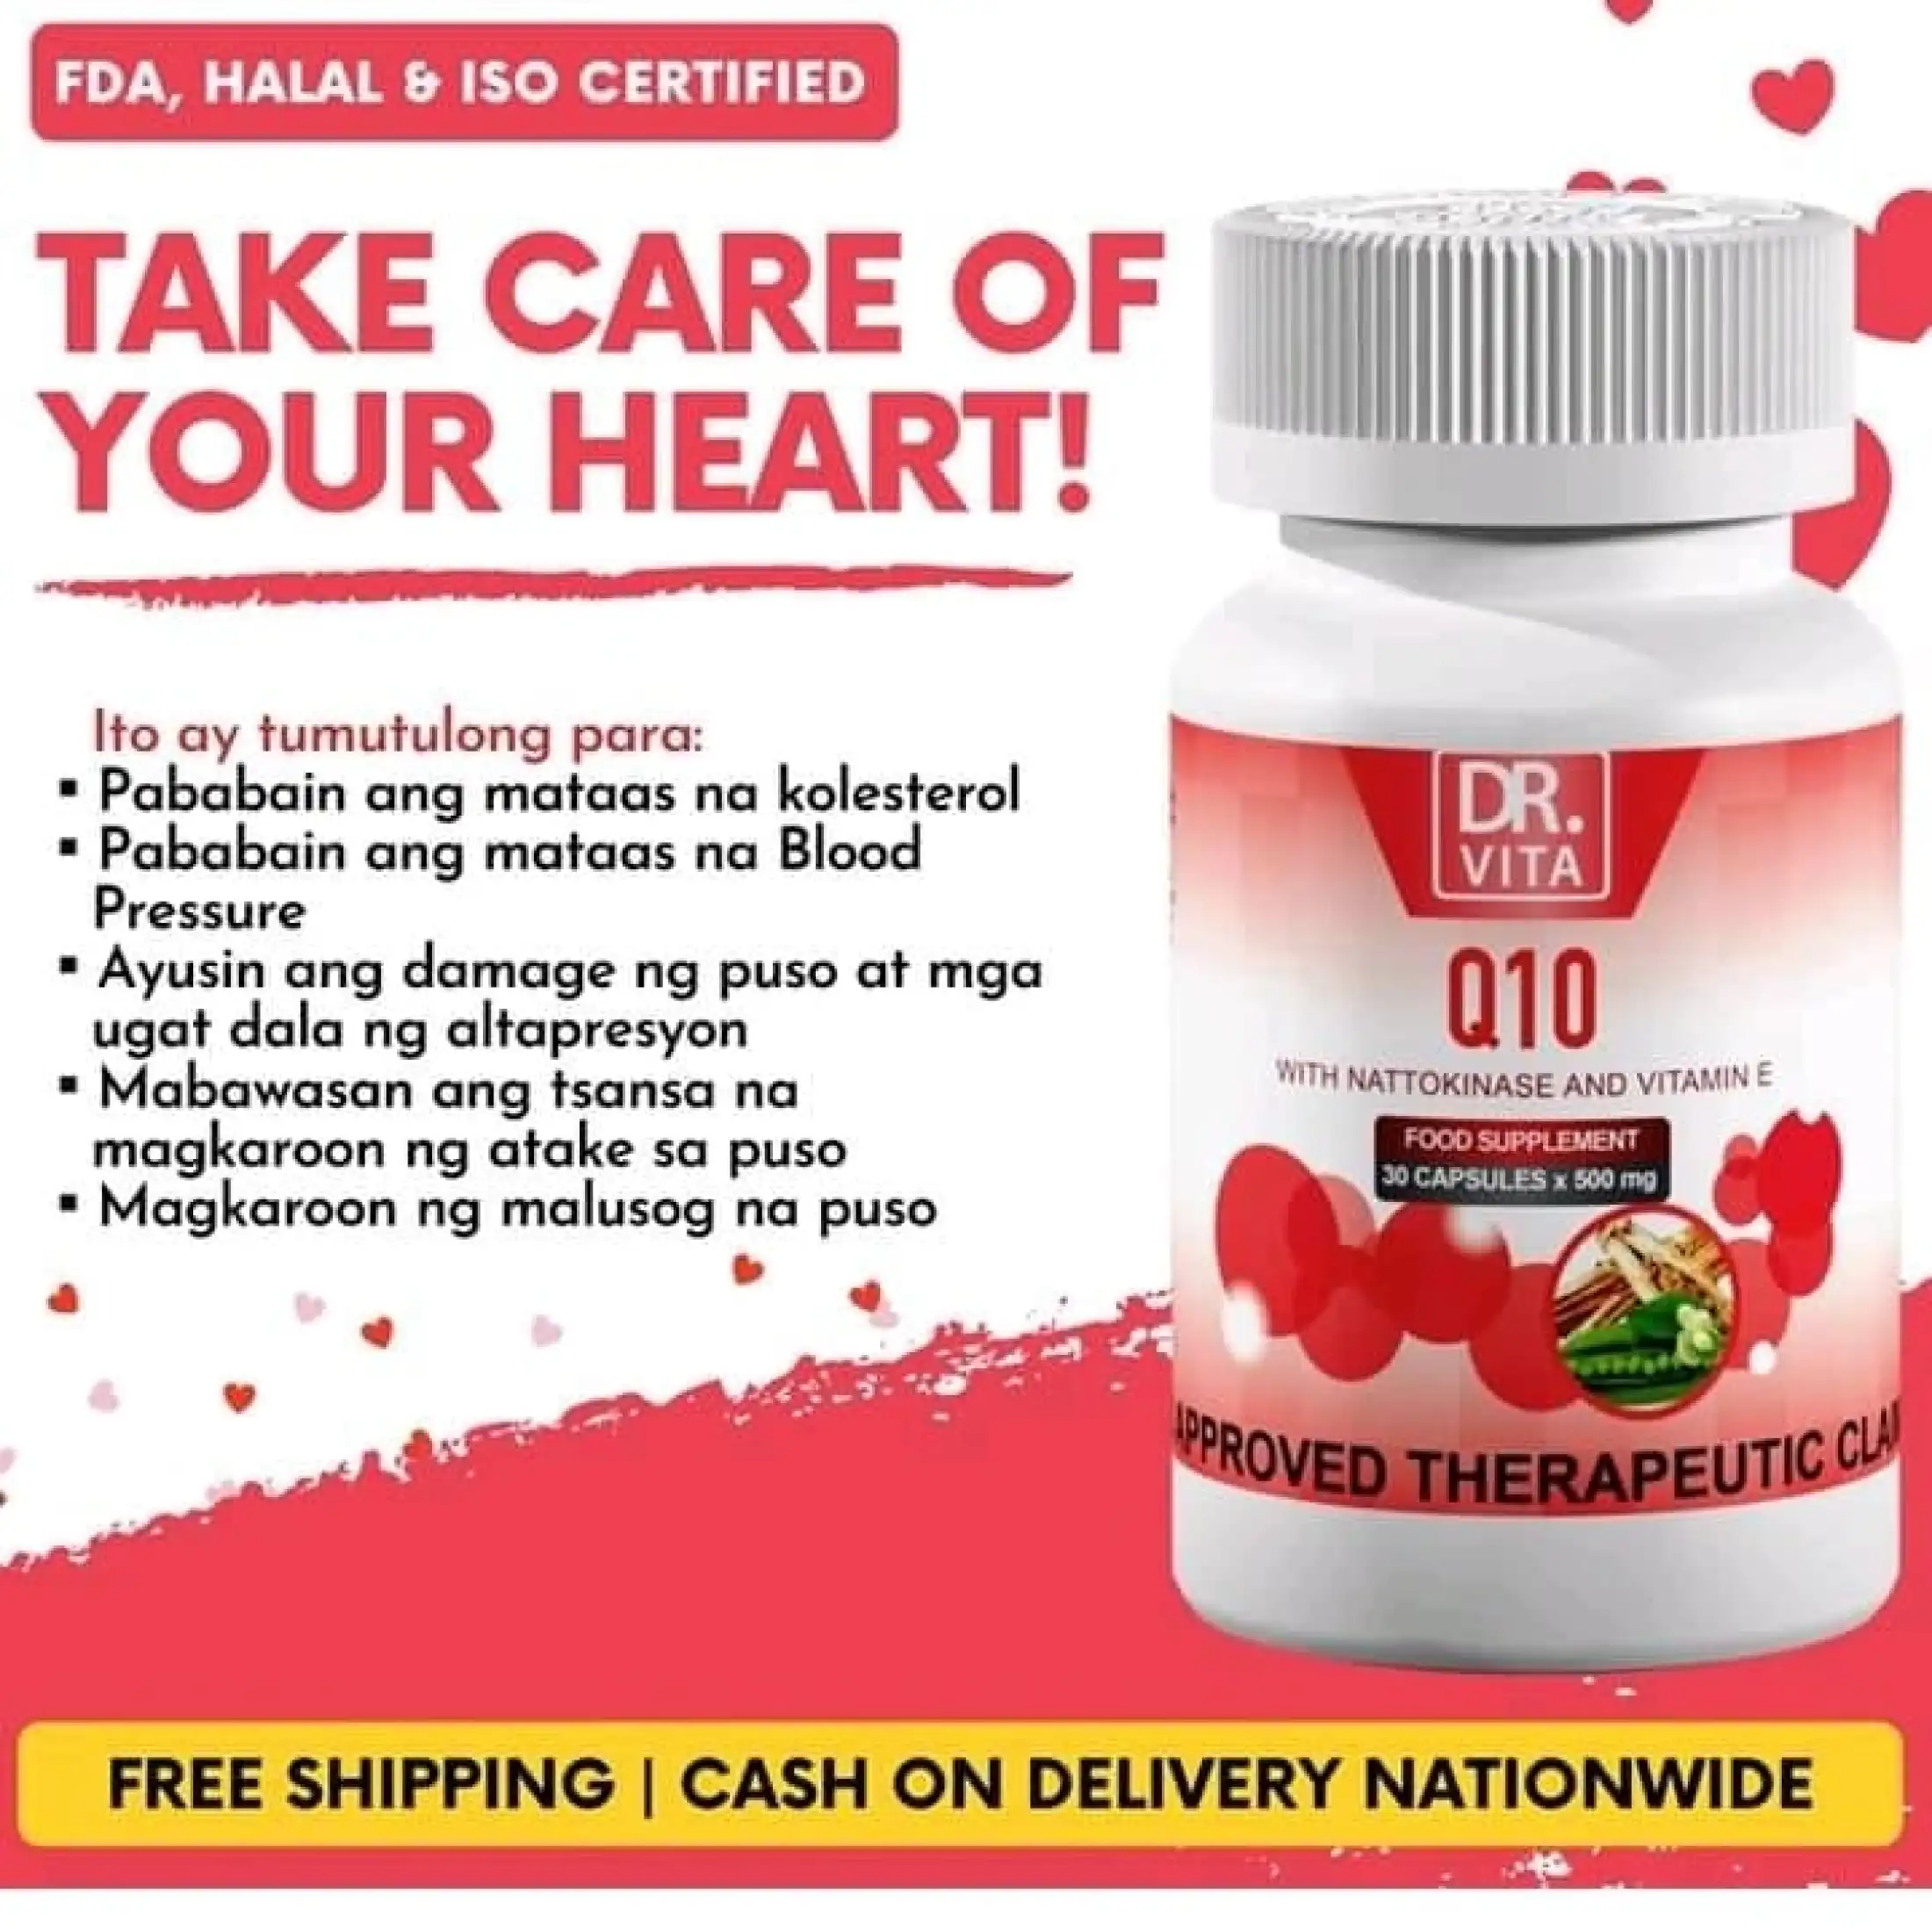 Vierde blad Noodlottig Authentic Dr. Vita Q10 with Nattokinase and Vitamin E for Healthy heart,  Control blood pressure and cholesterol, Treat Heart Failure, repair damage  to the heart , repair damage to the heart ,